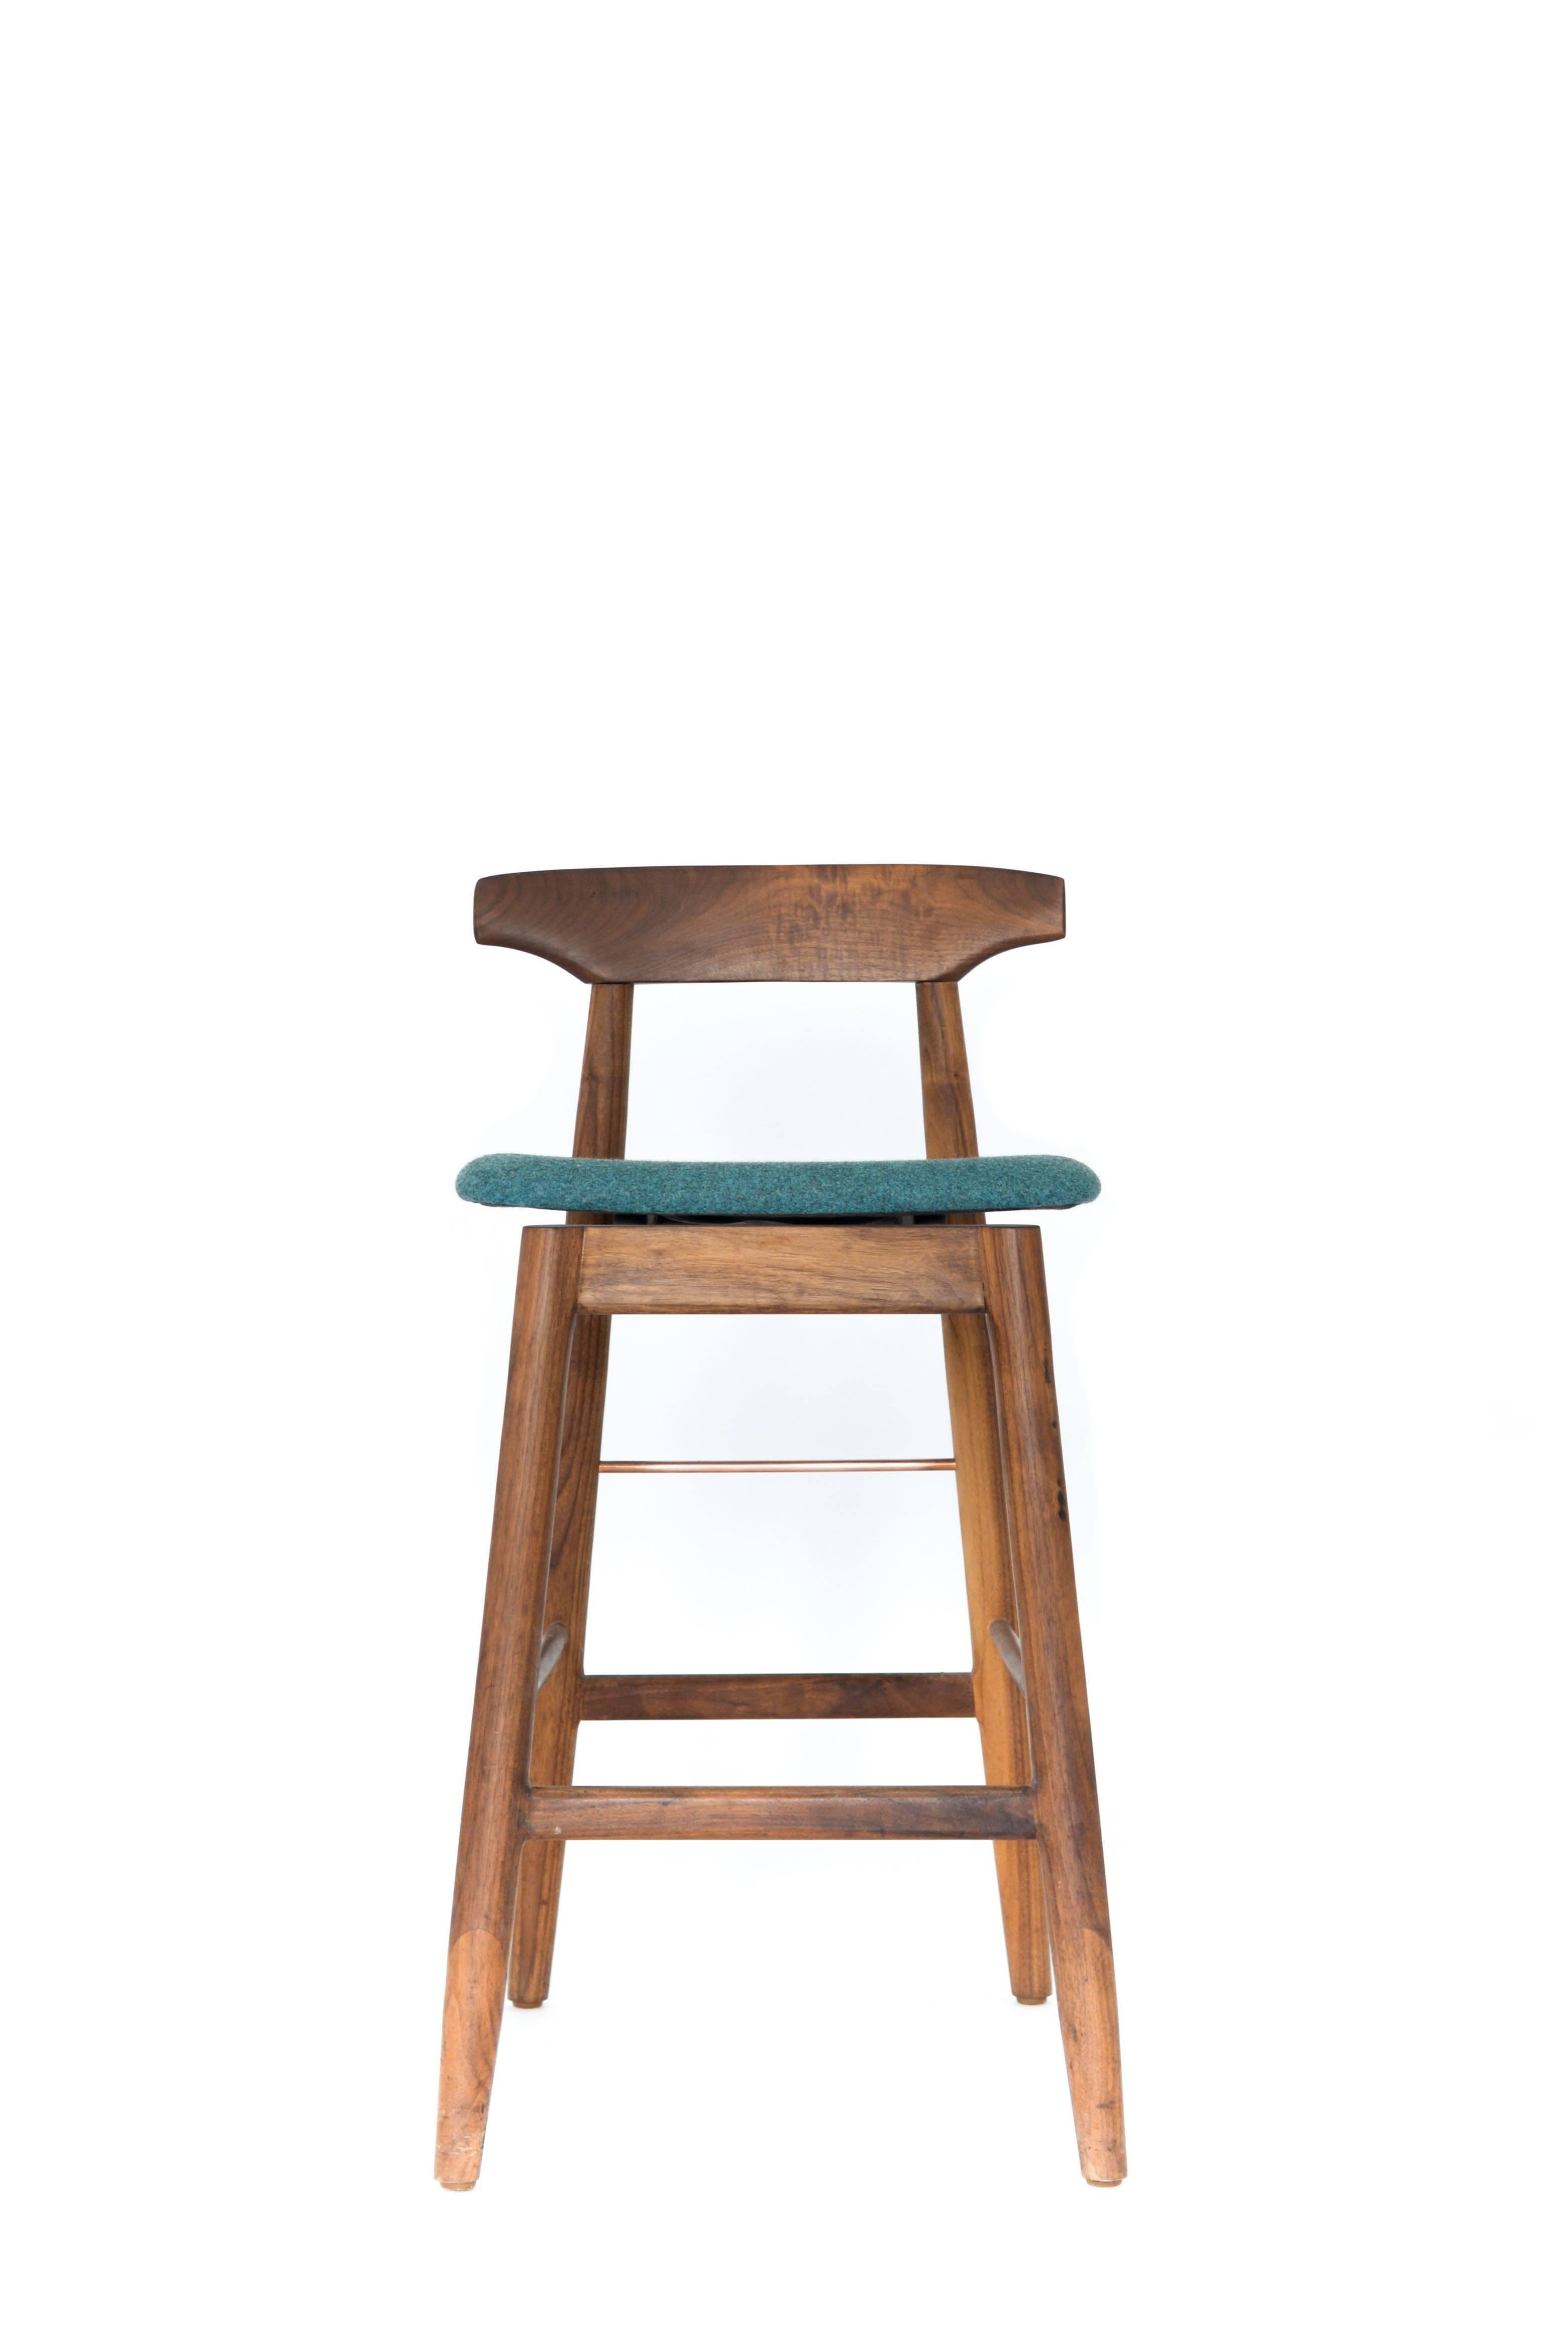 Hand-Crafted Walnut and Copper Wood High Stool with Custom Teal Felt Upholstery For Sale